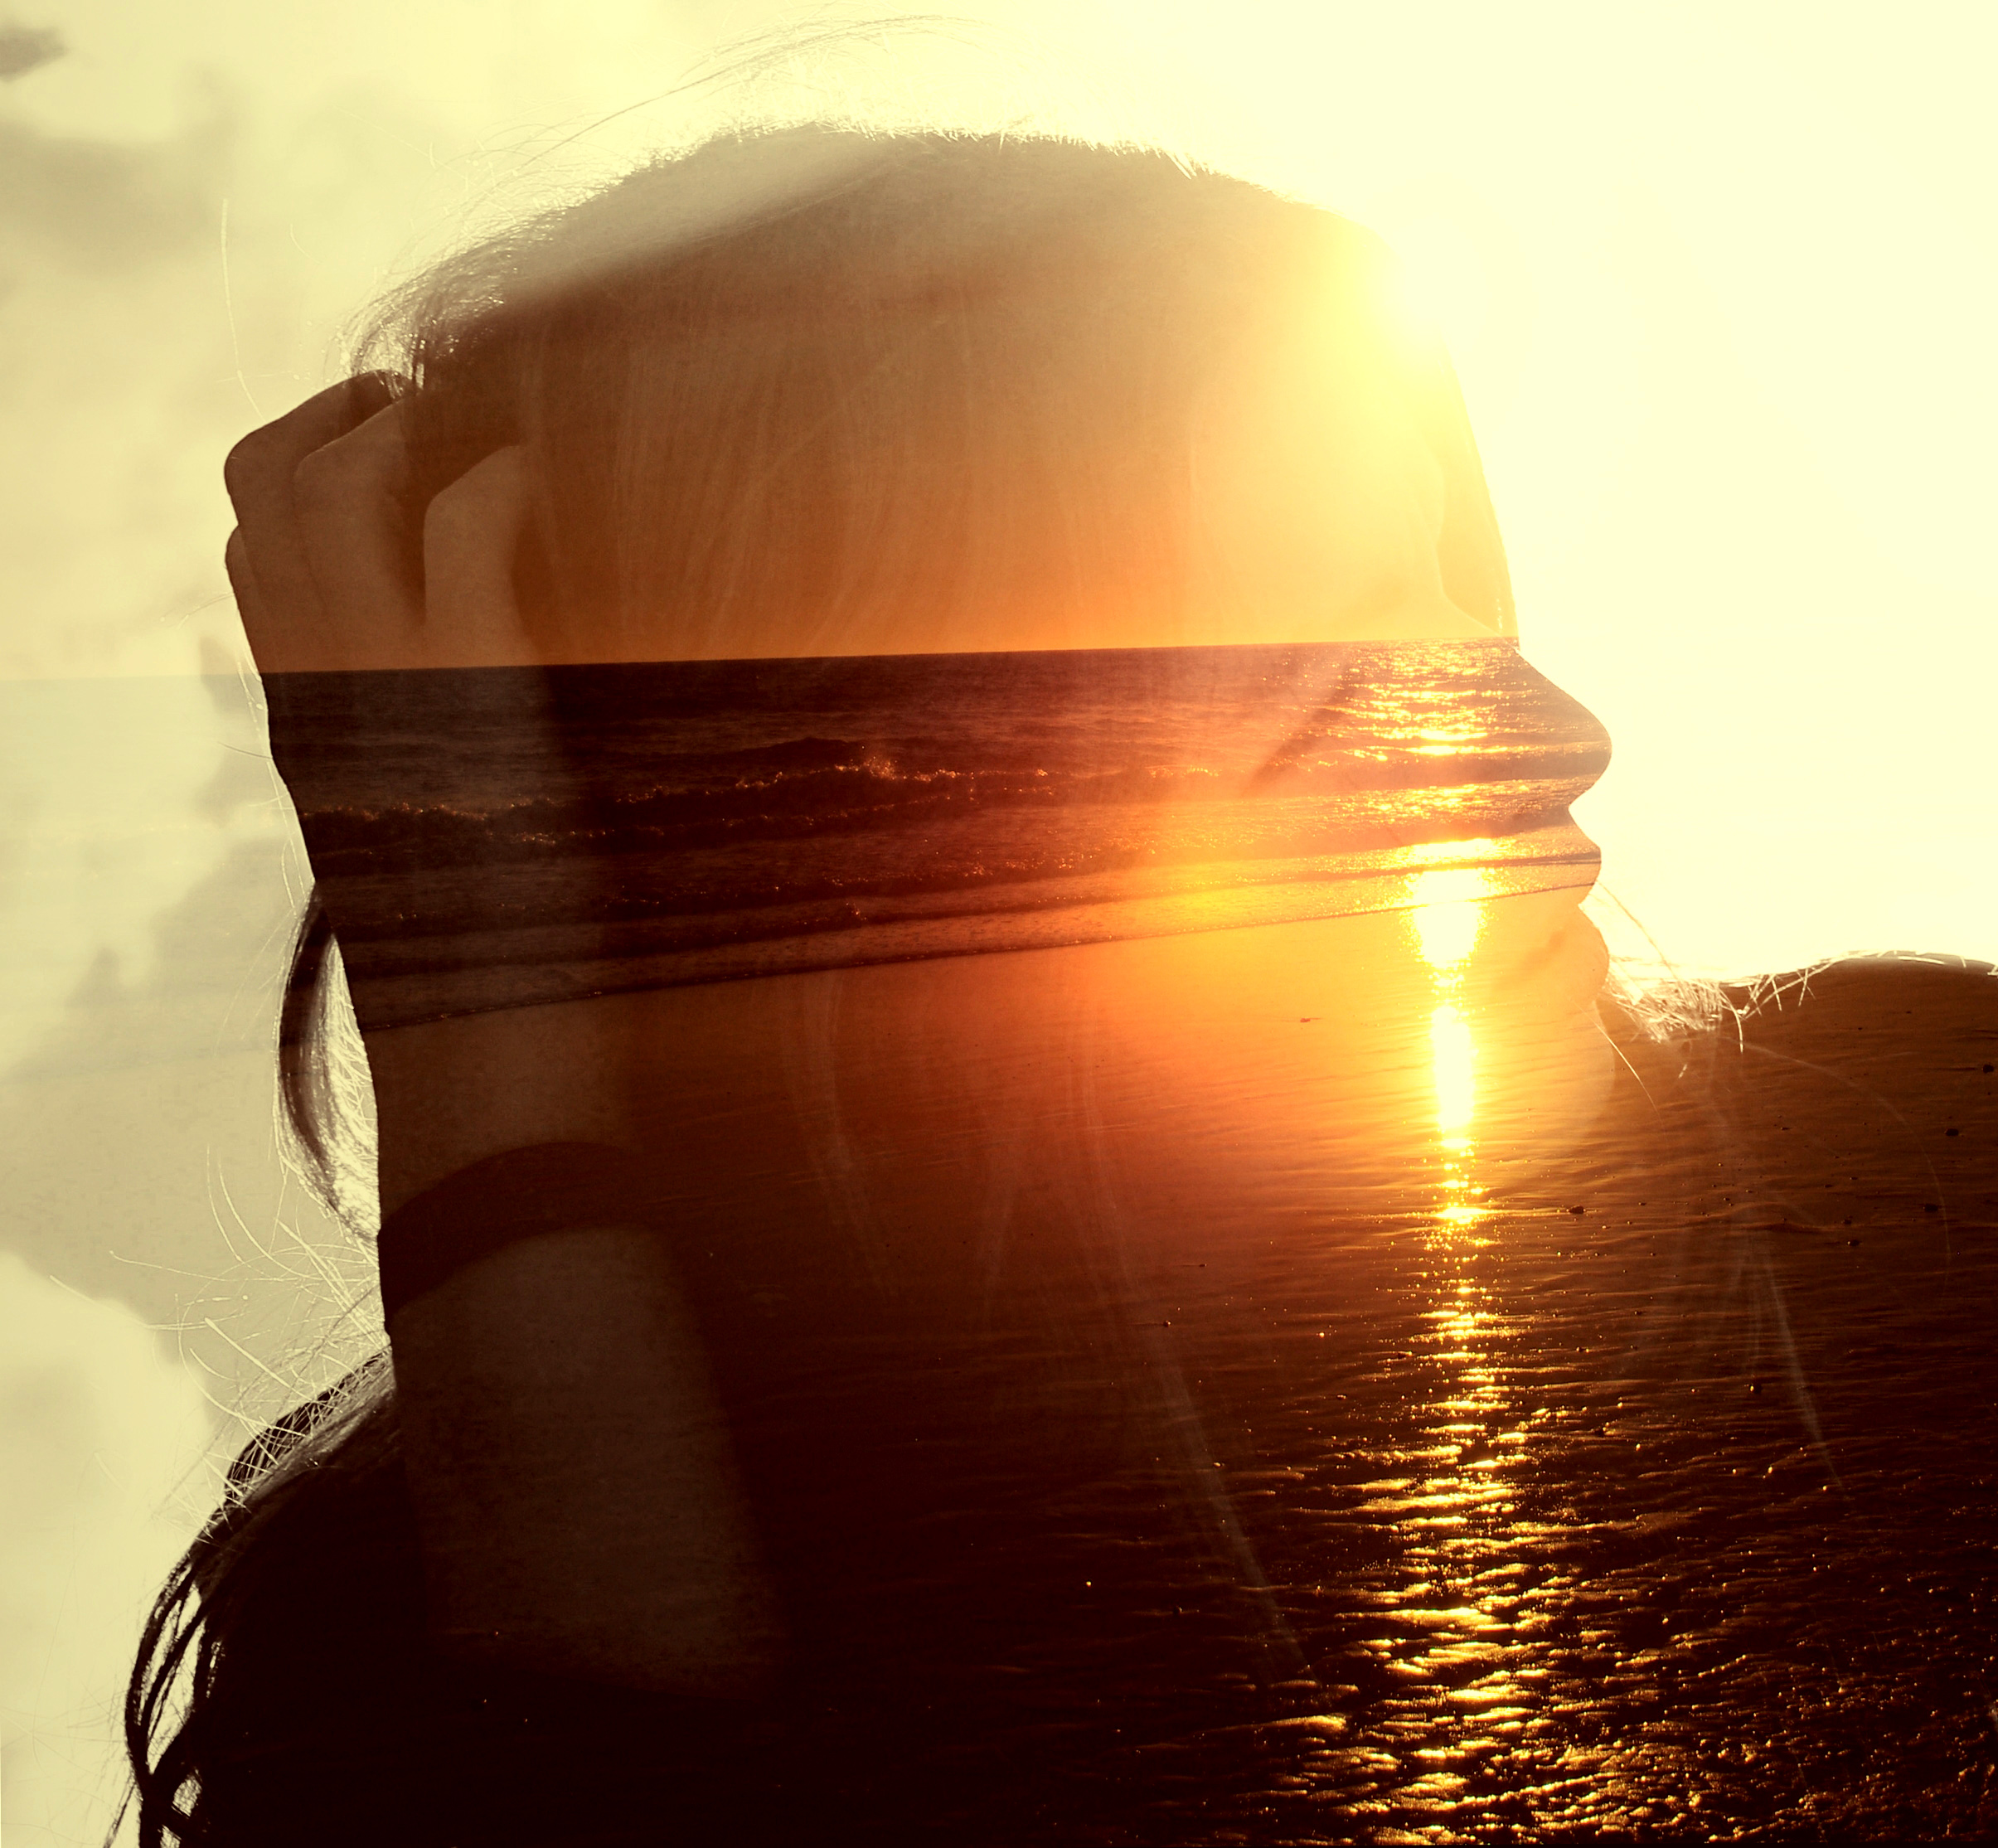 Girl on the beach at sunset - double exposure effect photo